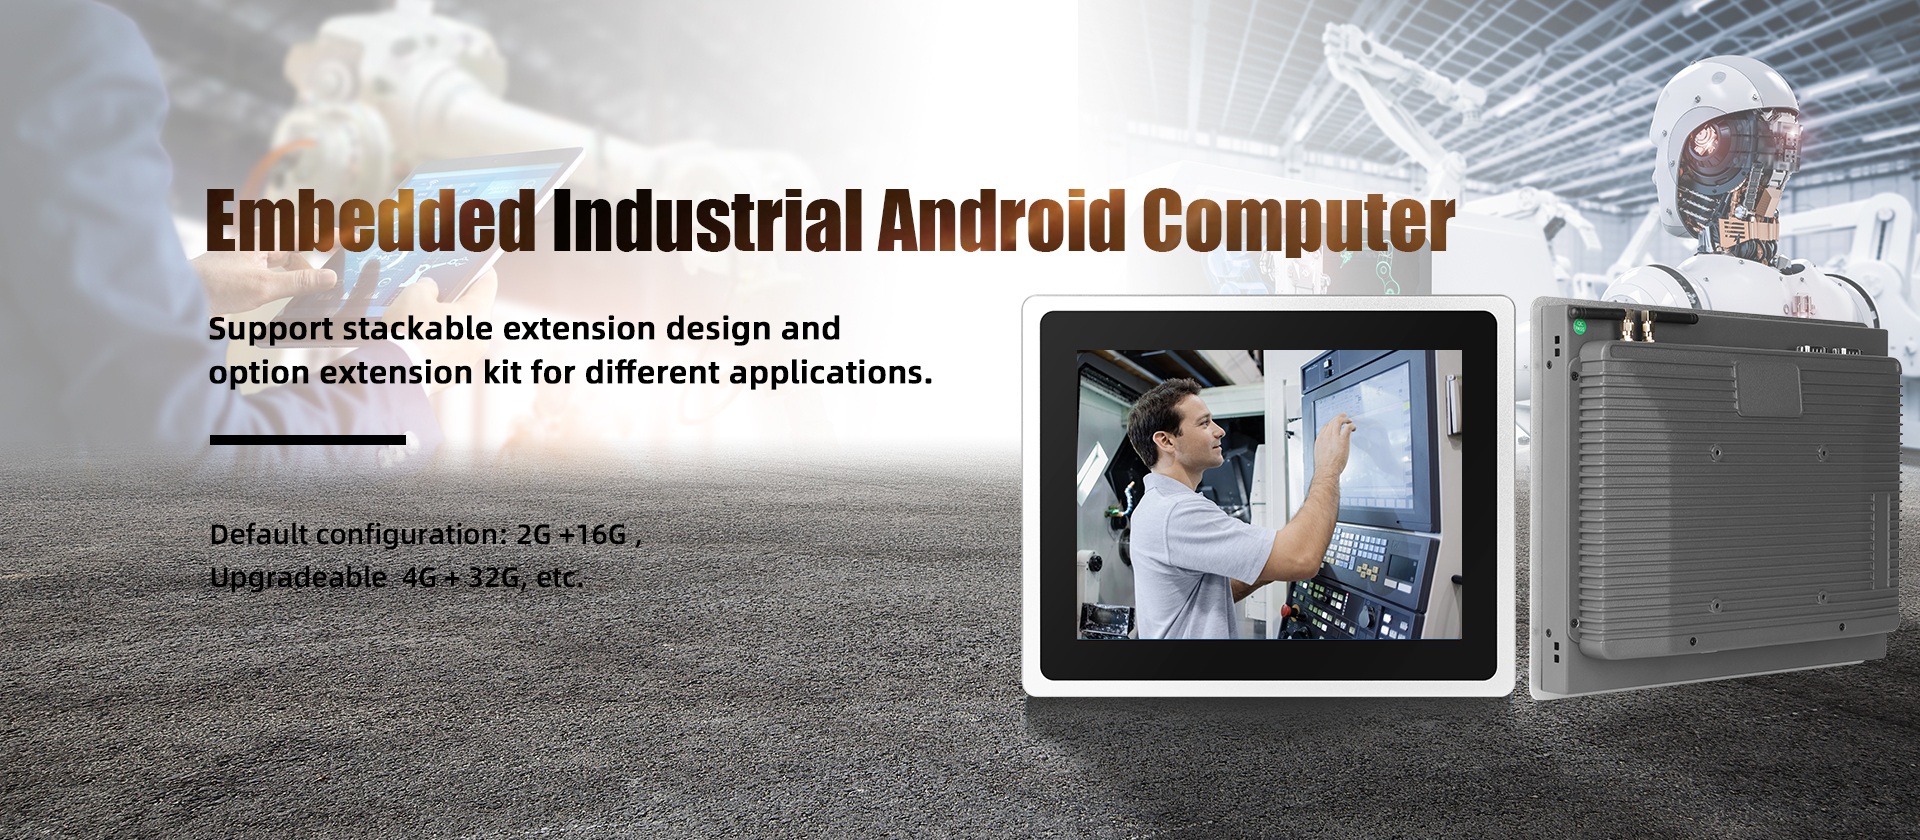 Embedded Industrial Android ComputerEmbedded Industrial Android Computer